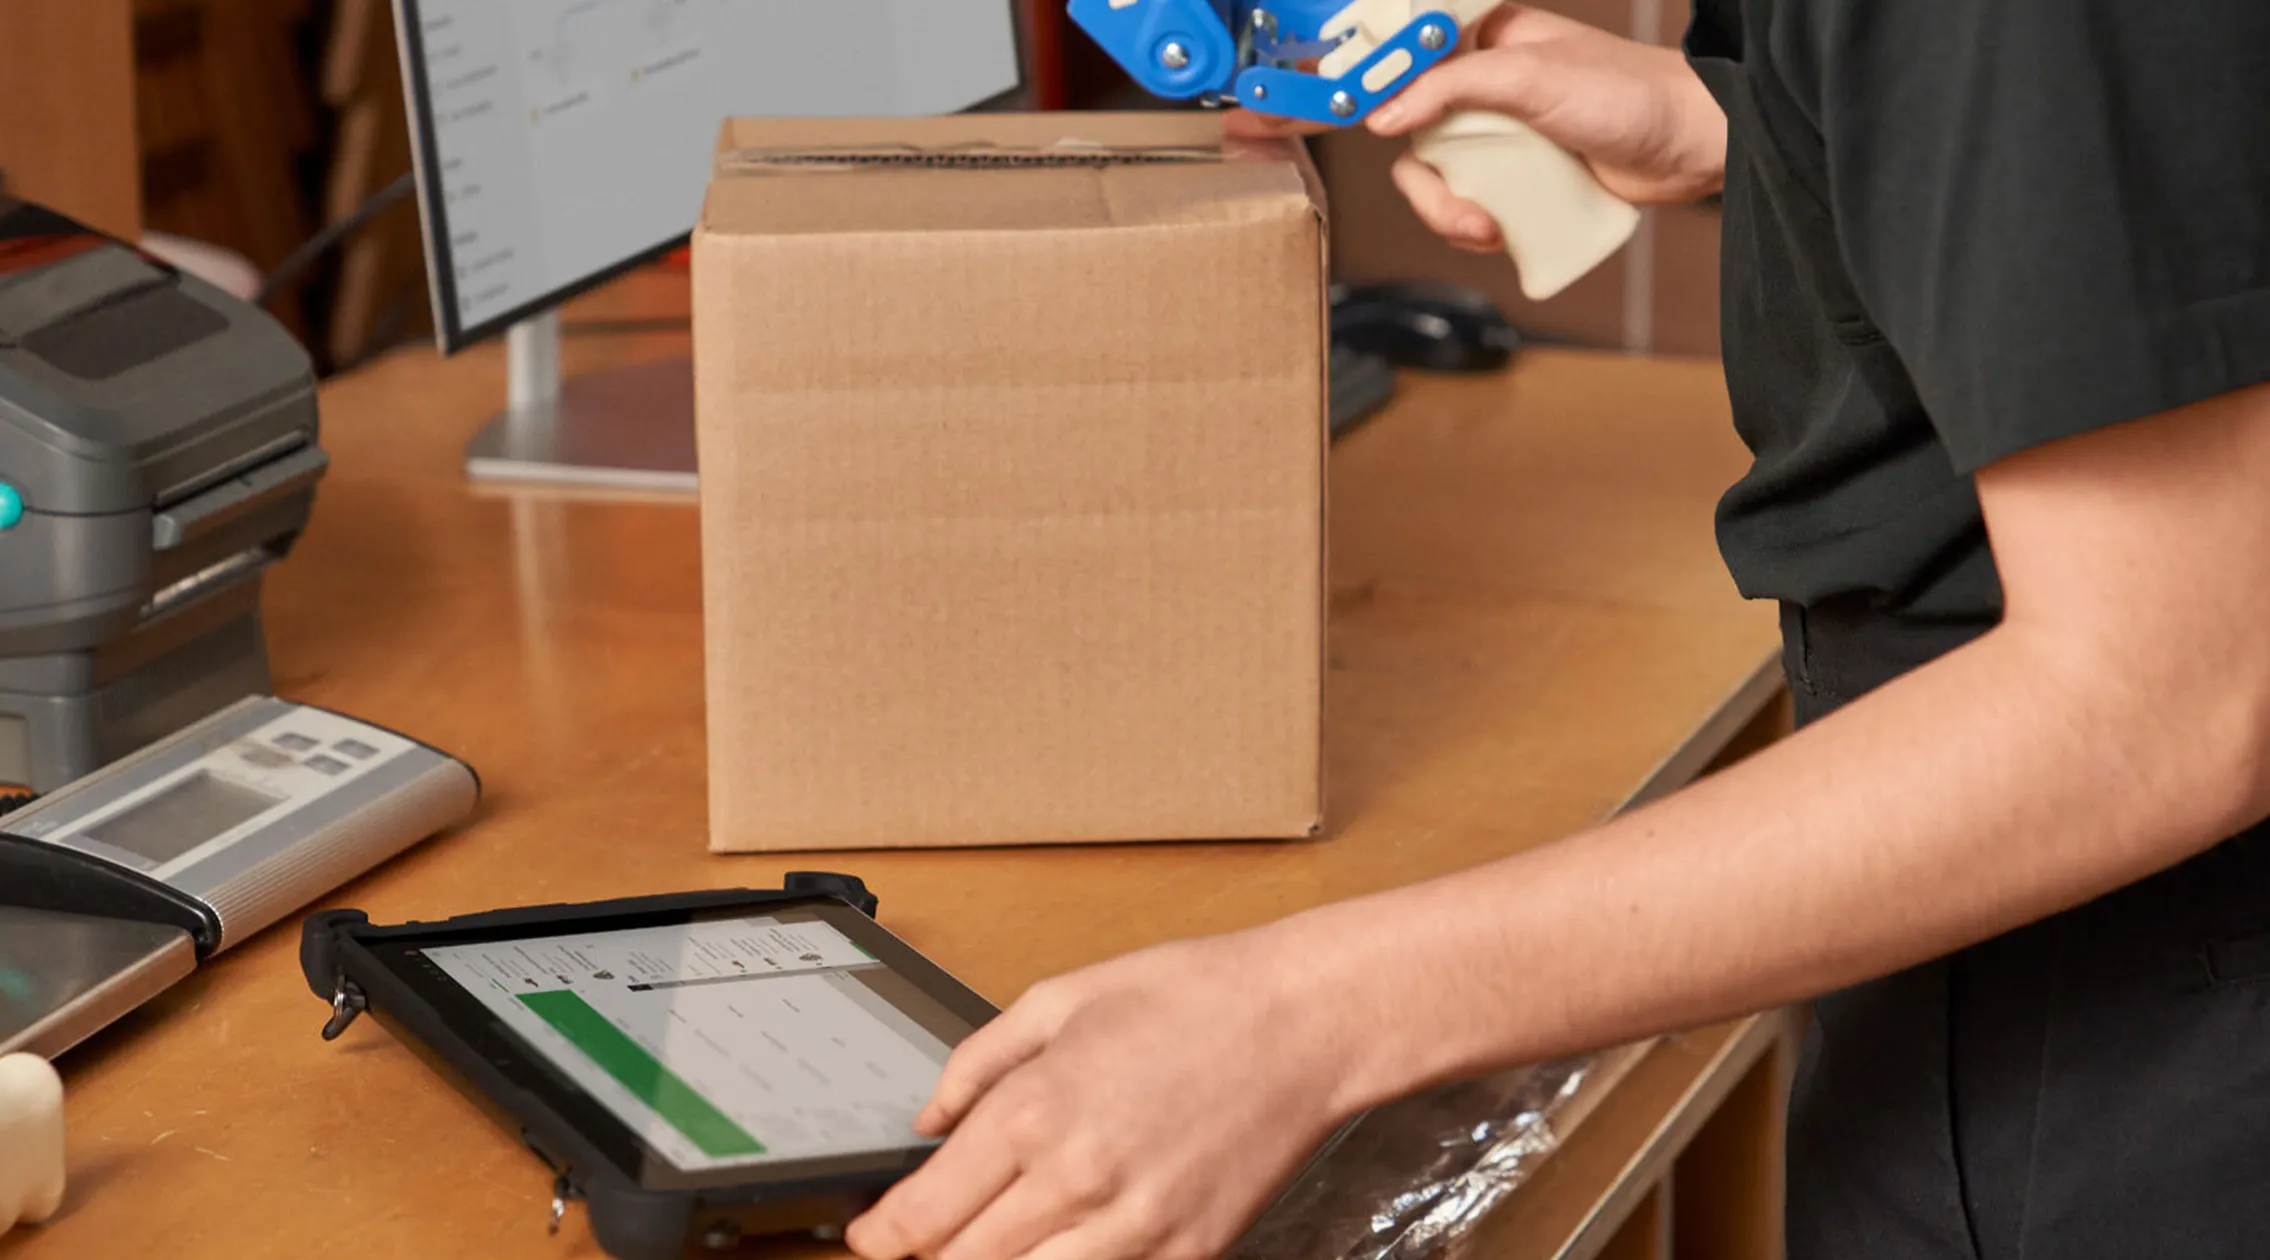 Unboxing innovation: Sameday and Zitec's new app elevates delivery experience